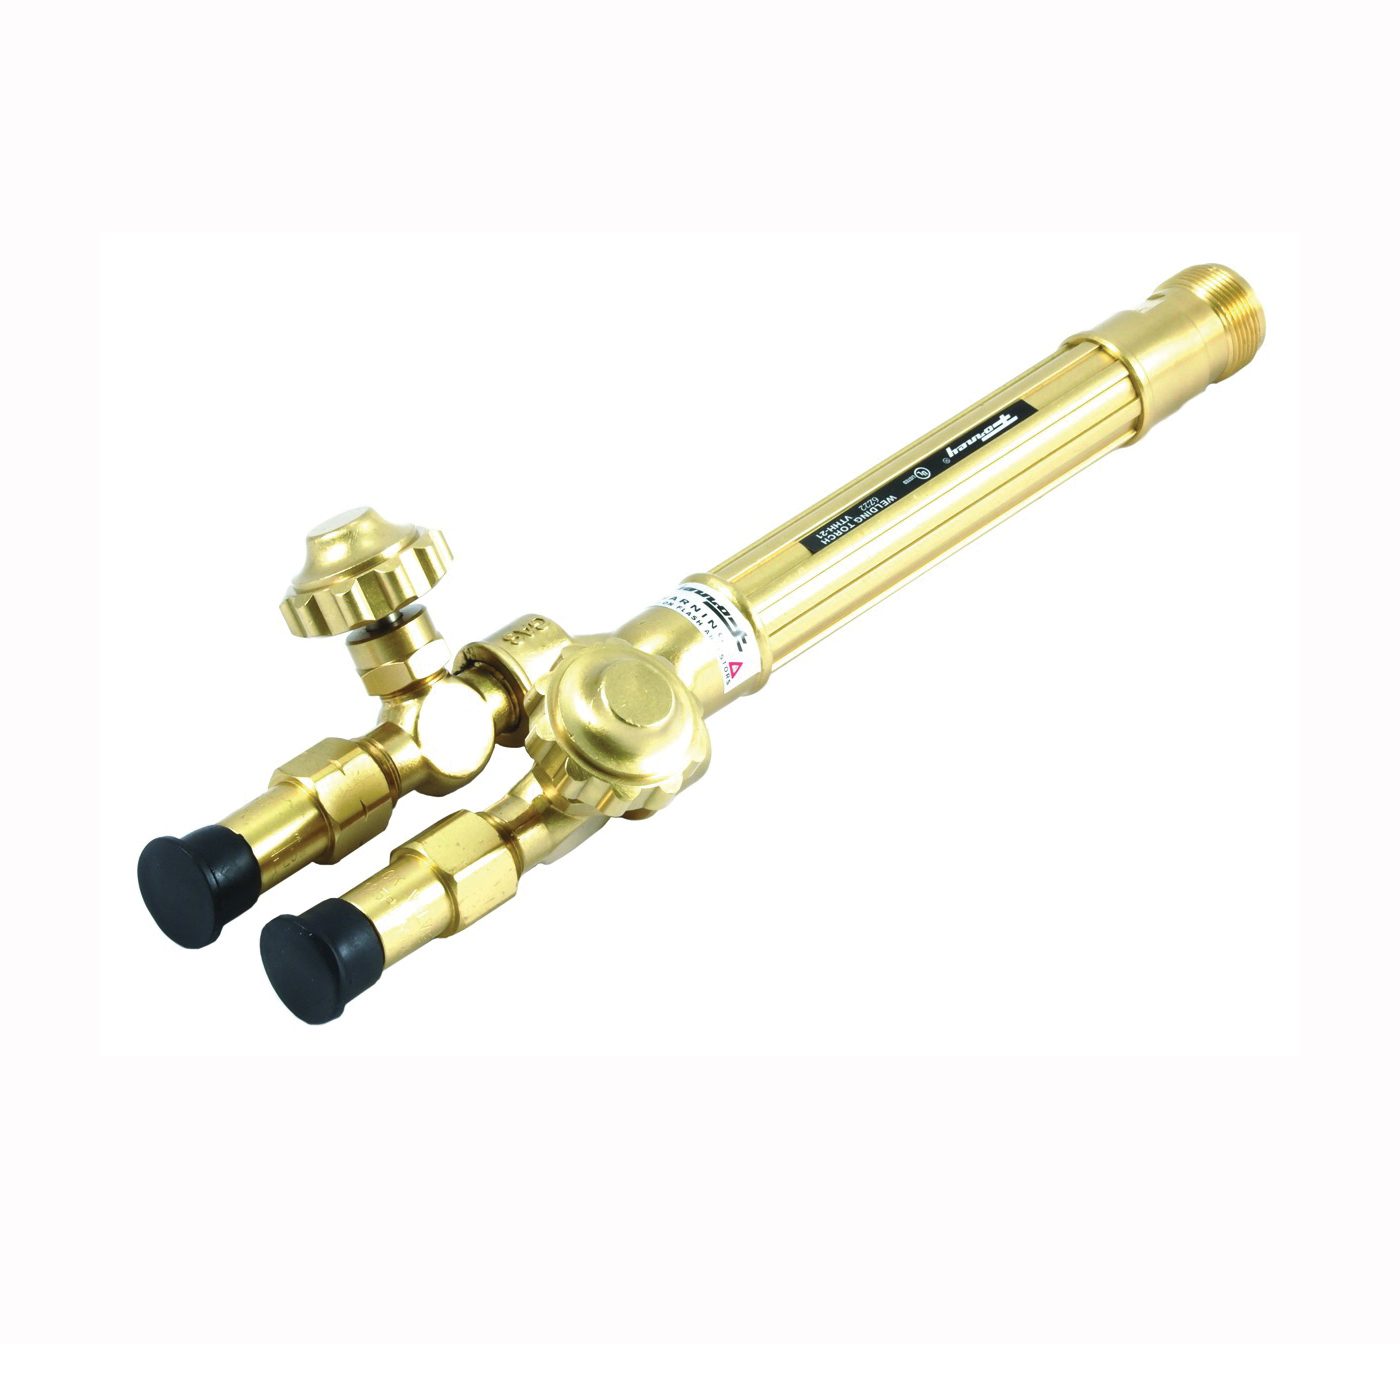 Forney 87102 Torch Handle, Compatible, Heavy Duty, Oxy-Acetylene, Tough Extruded Brass, For: Forney 01711 Torch Kit